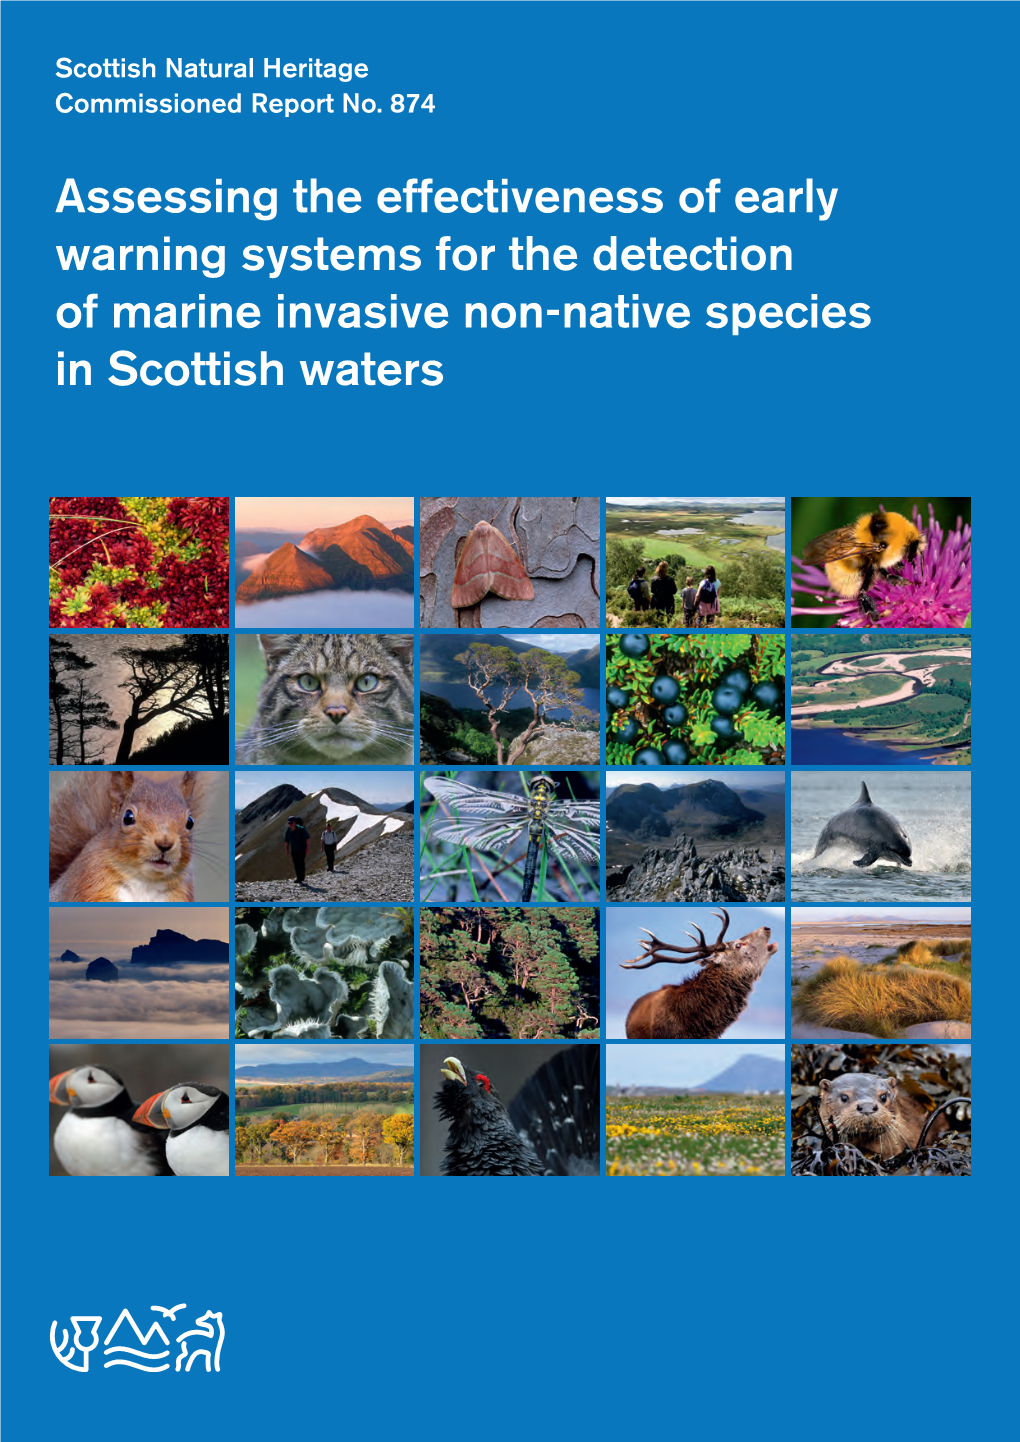 SNH Commissioned Report 874: Assessing the Effectiveness of Early Warning Systems for the Detection of Marine Invasive Non-Nativ